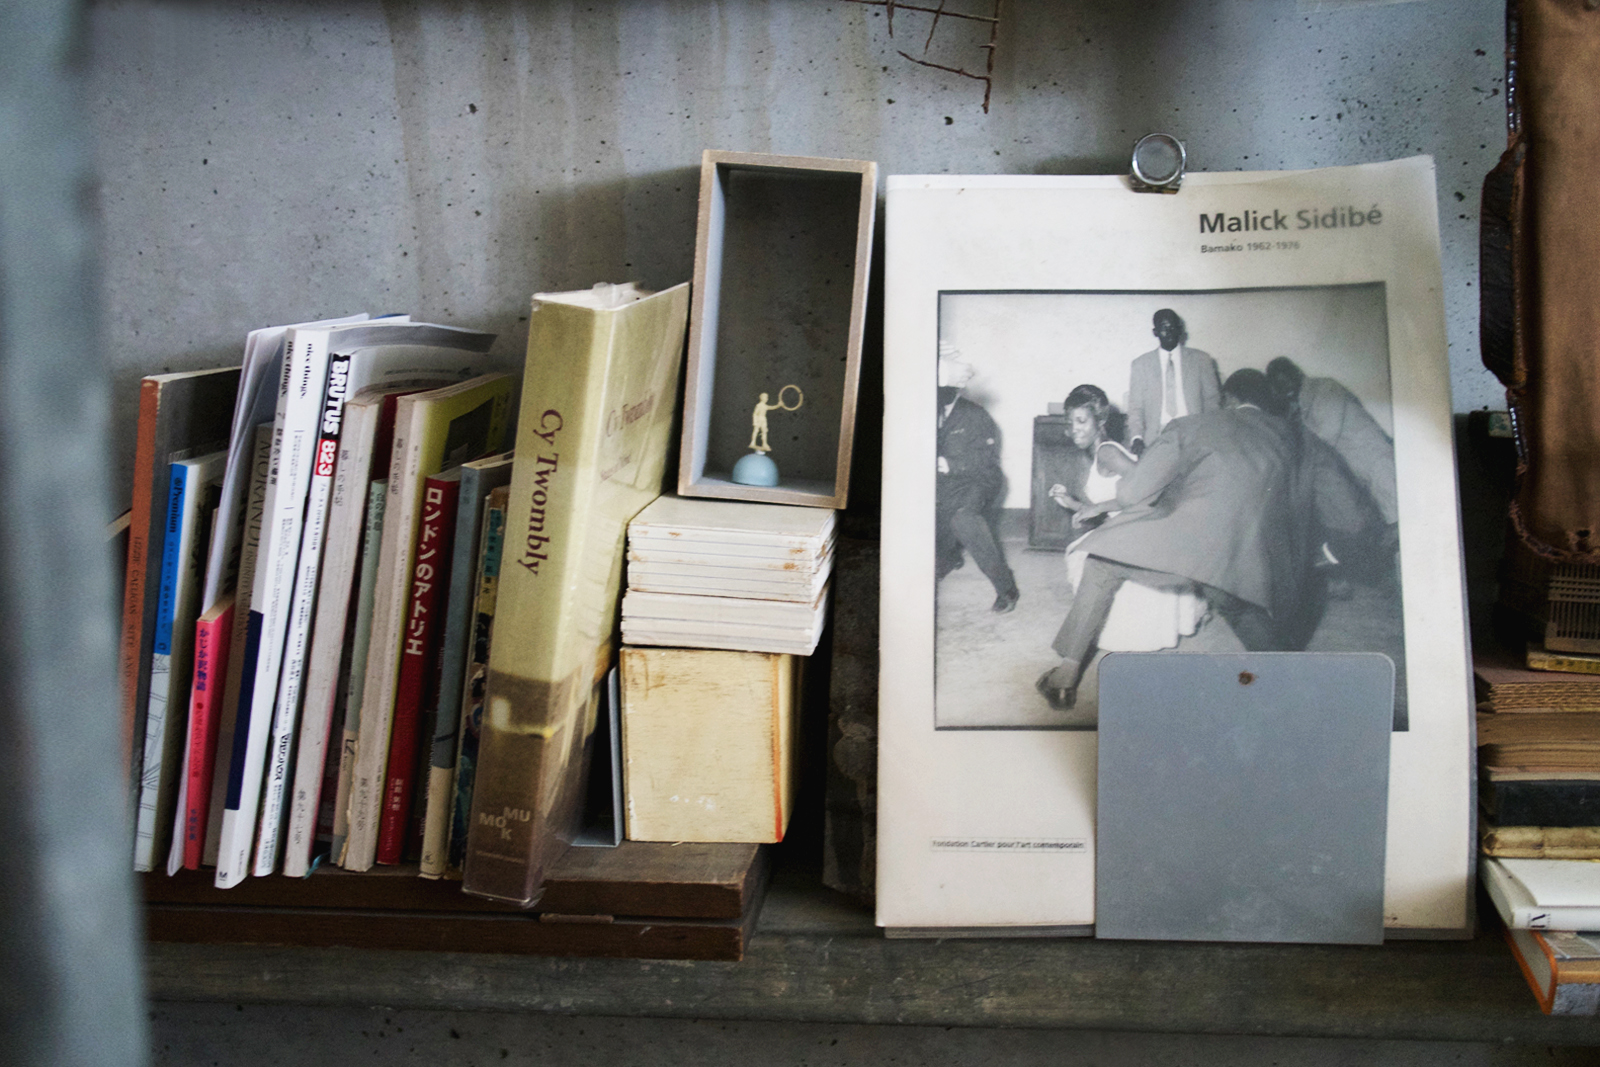 Book collection propped on a shelf featuring the cover of art book of works by Malick Sadibe